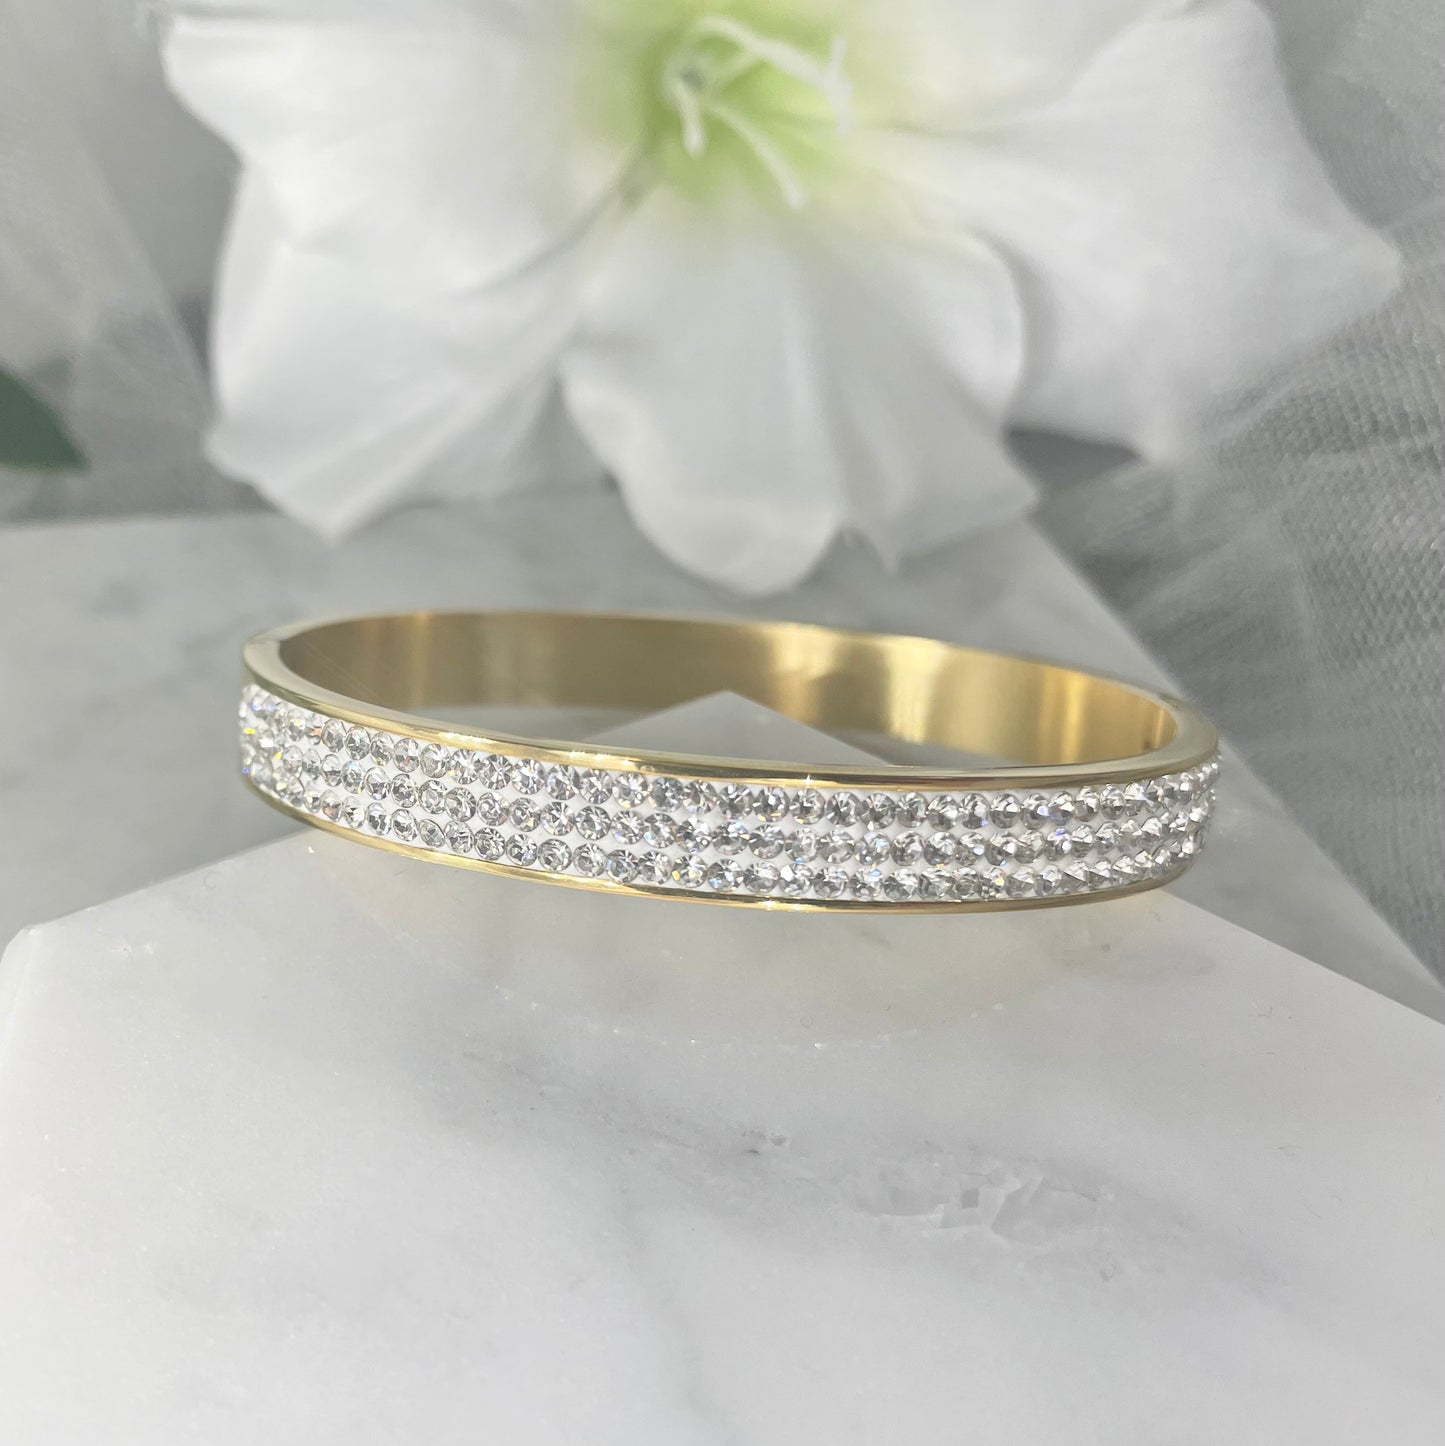 Elegant Roma Bridal Bangle in Trendy Styles, Perfect for Wedding Accessories - Divine Bridal